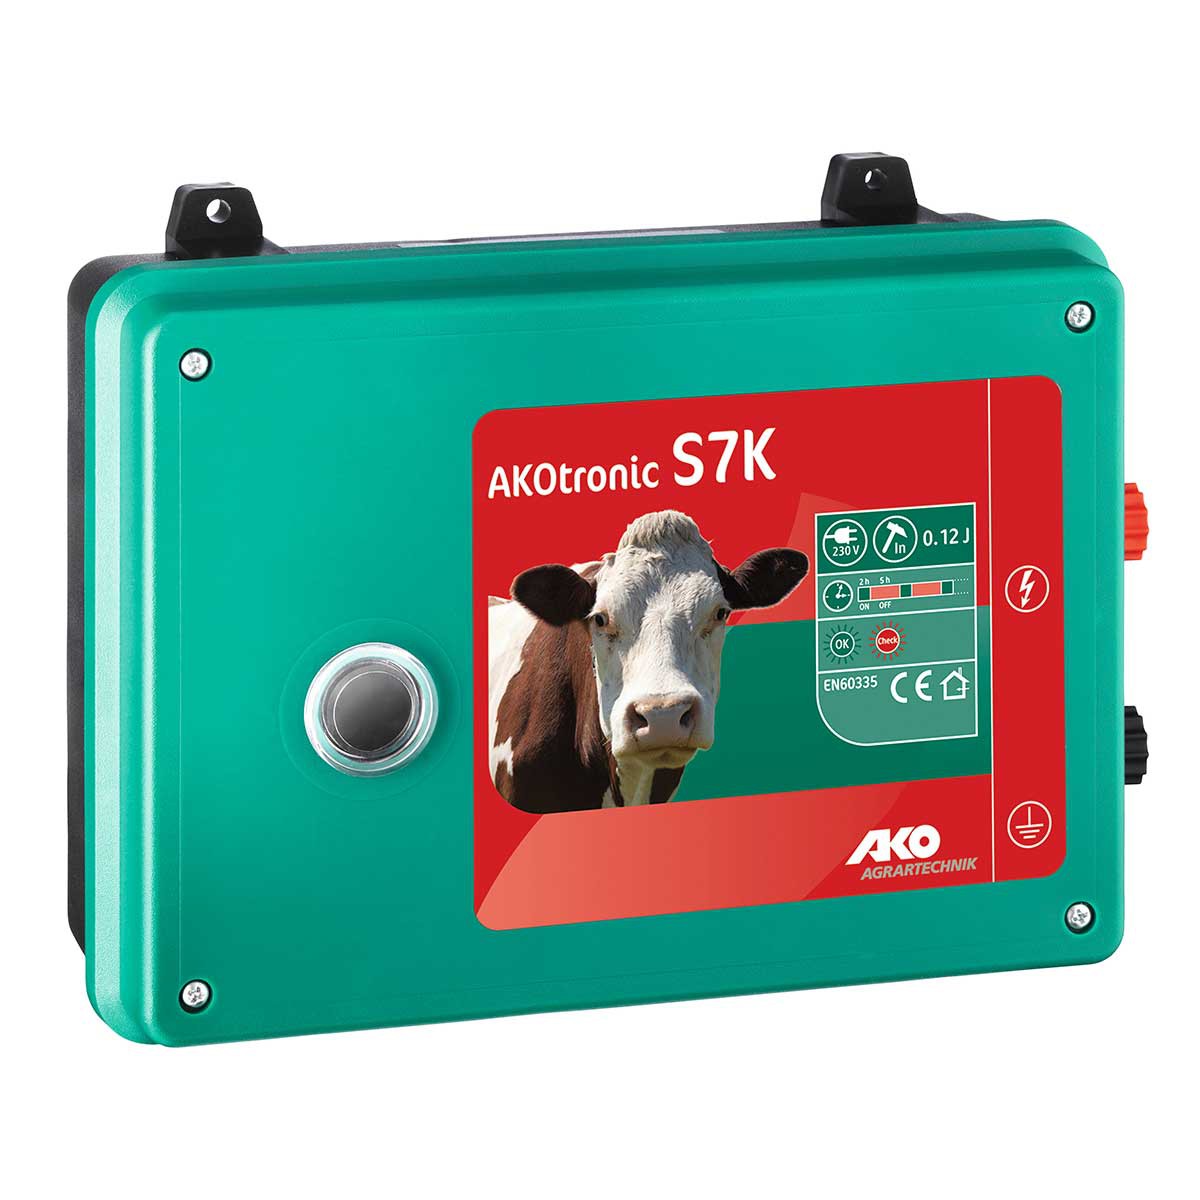 AKOtronic S7K cow trainer with timer